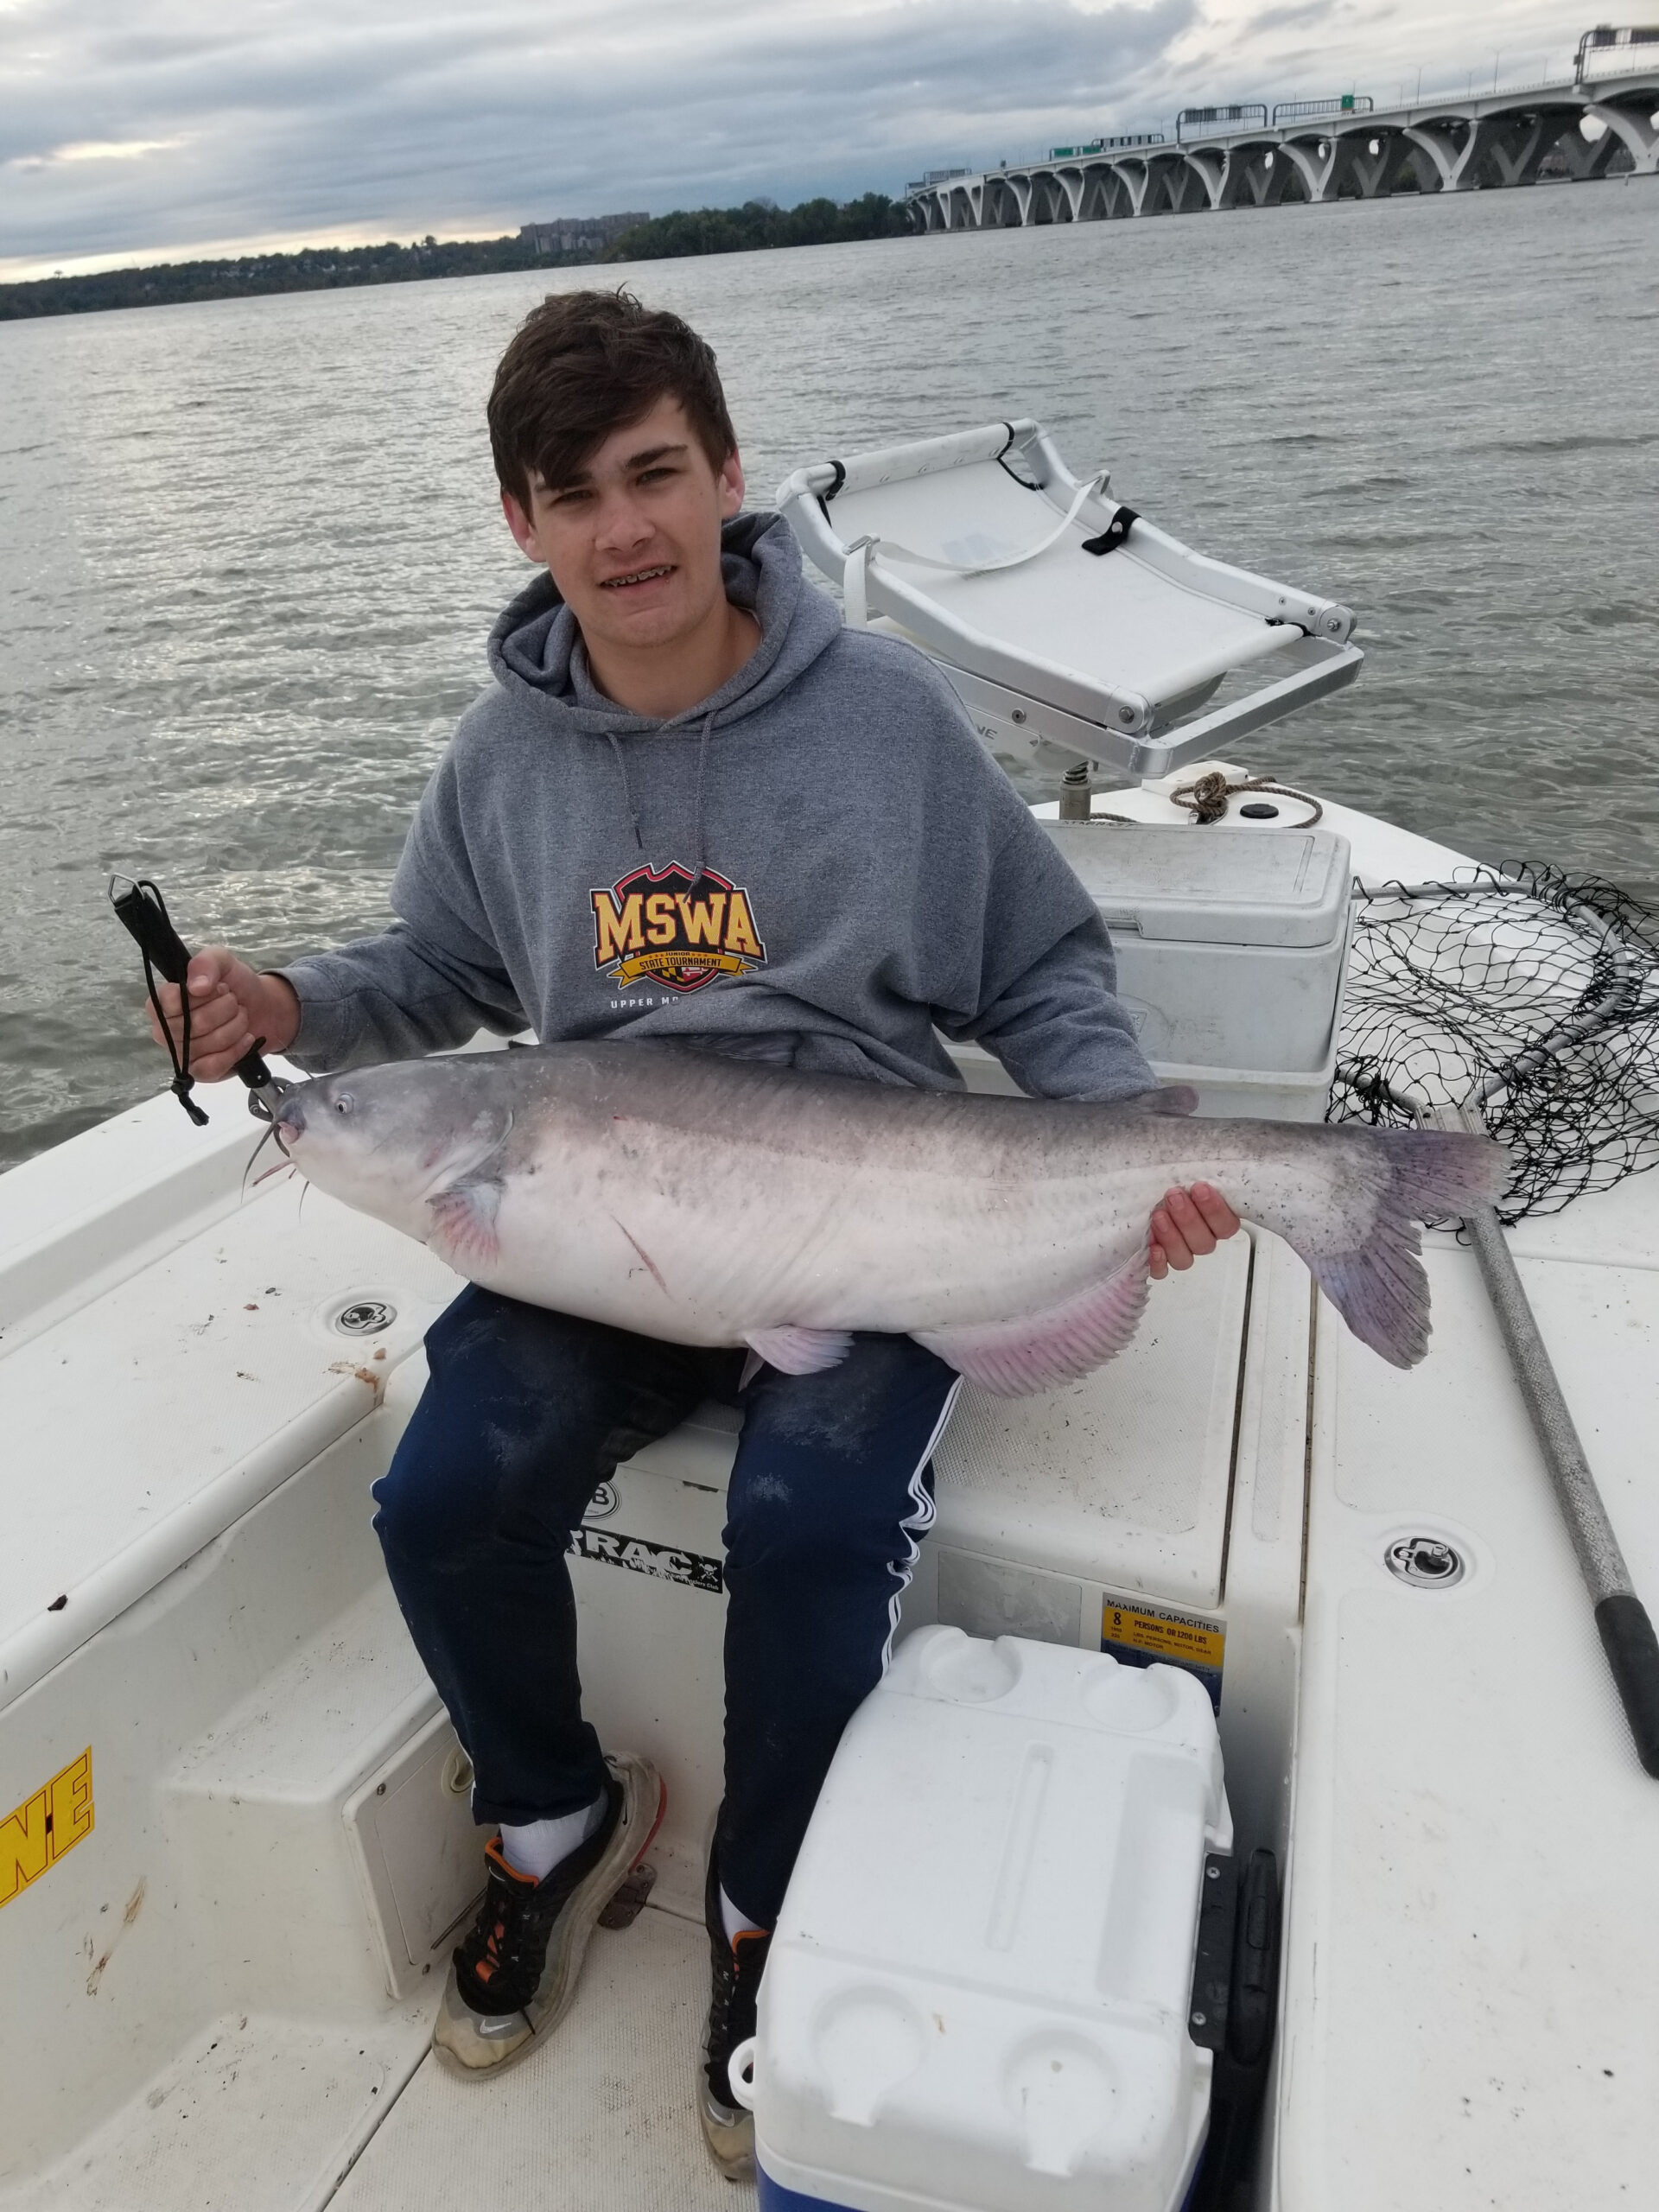 https://indianheadcharters.com/wp-content/uploads/2020/10/10242020-1-scaled.jpg